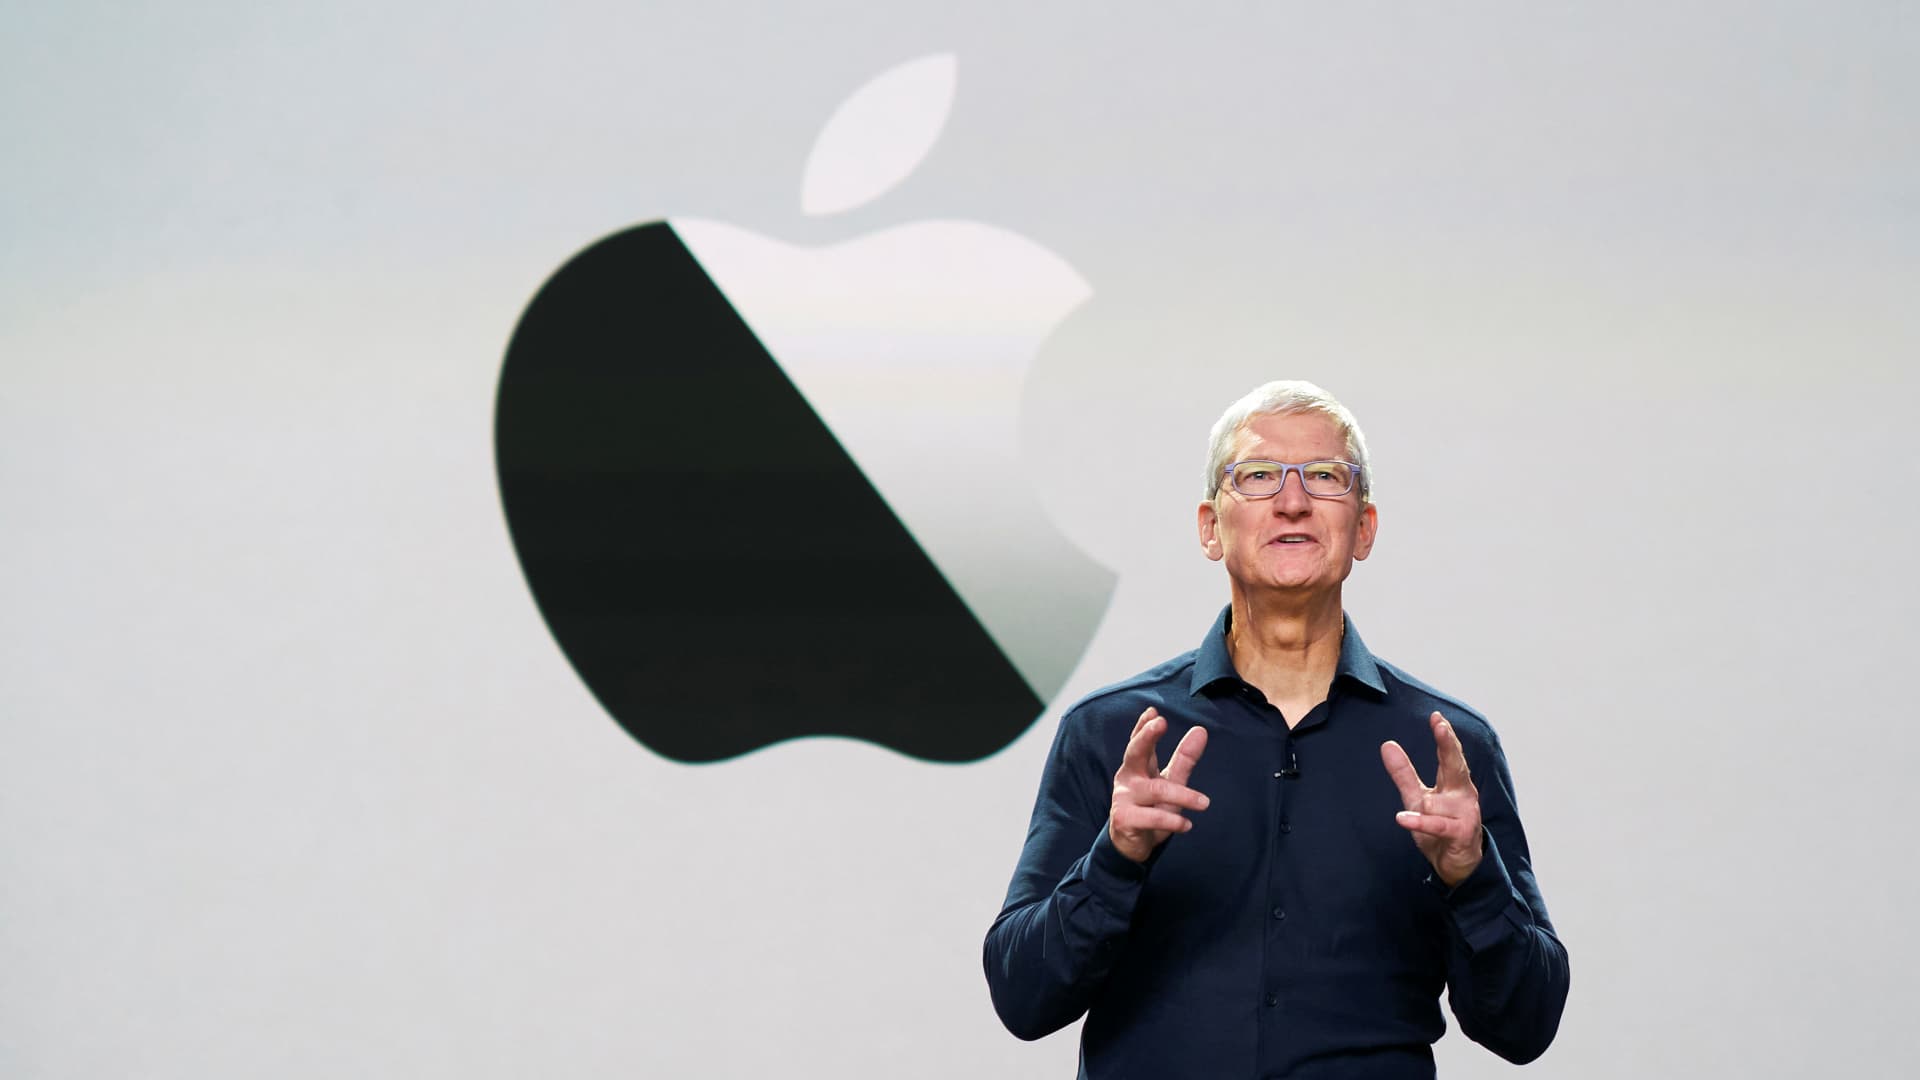 Apple just announced its big annual conference starts June 6, new iPhone software expected